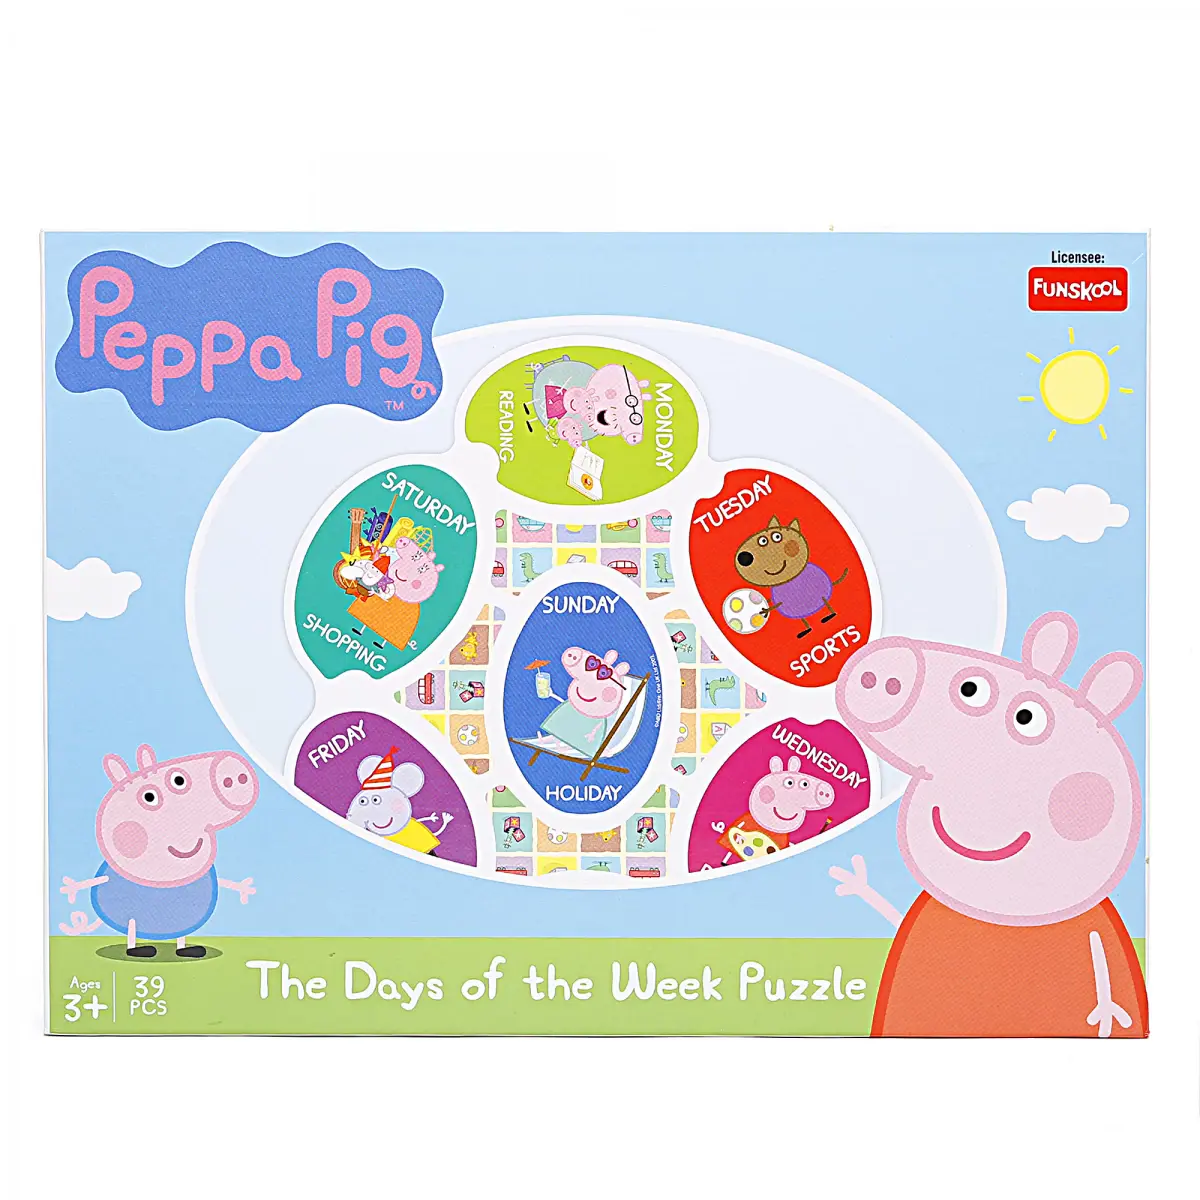 Funskool Peppa Pig Days Of The Week Puzzle, 39PCs, 3Y+, Multicolour